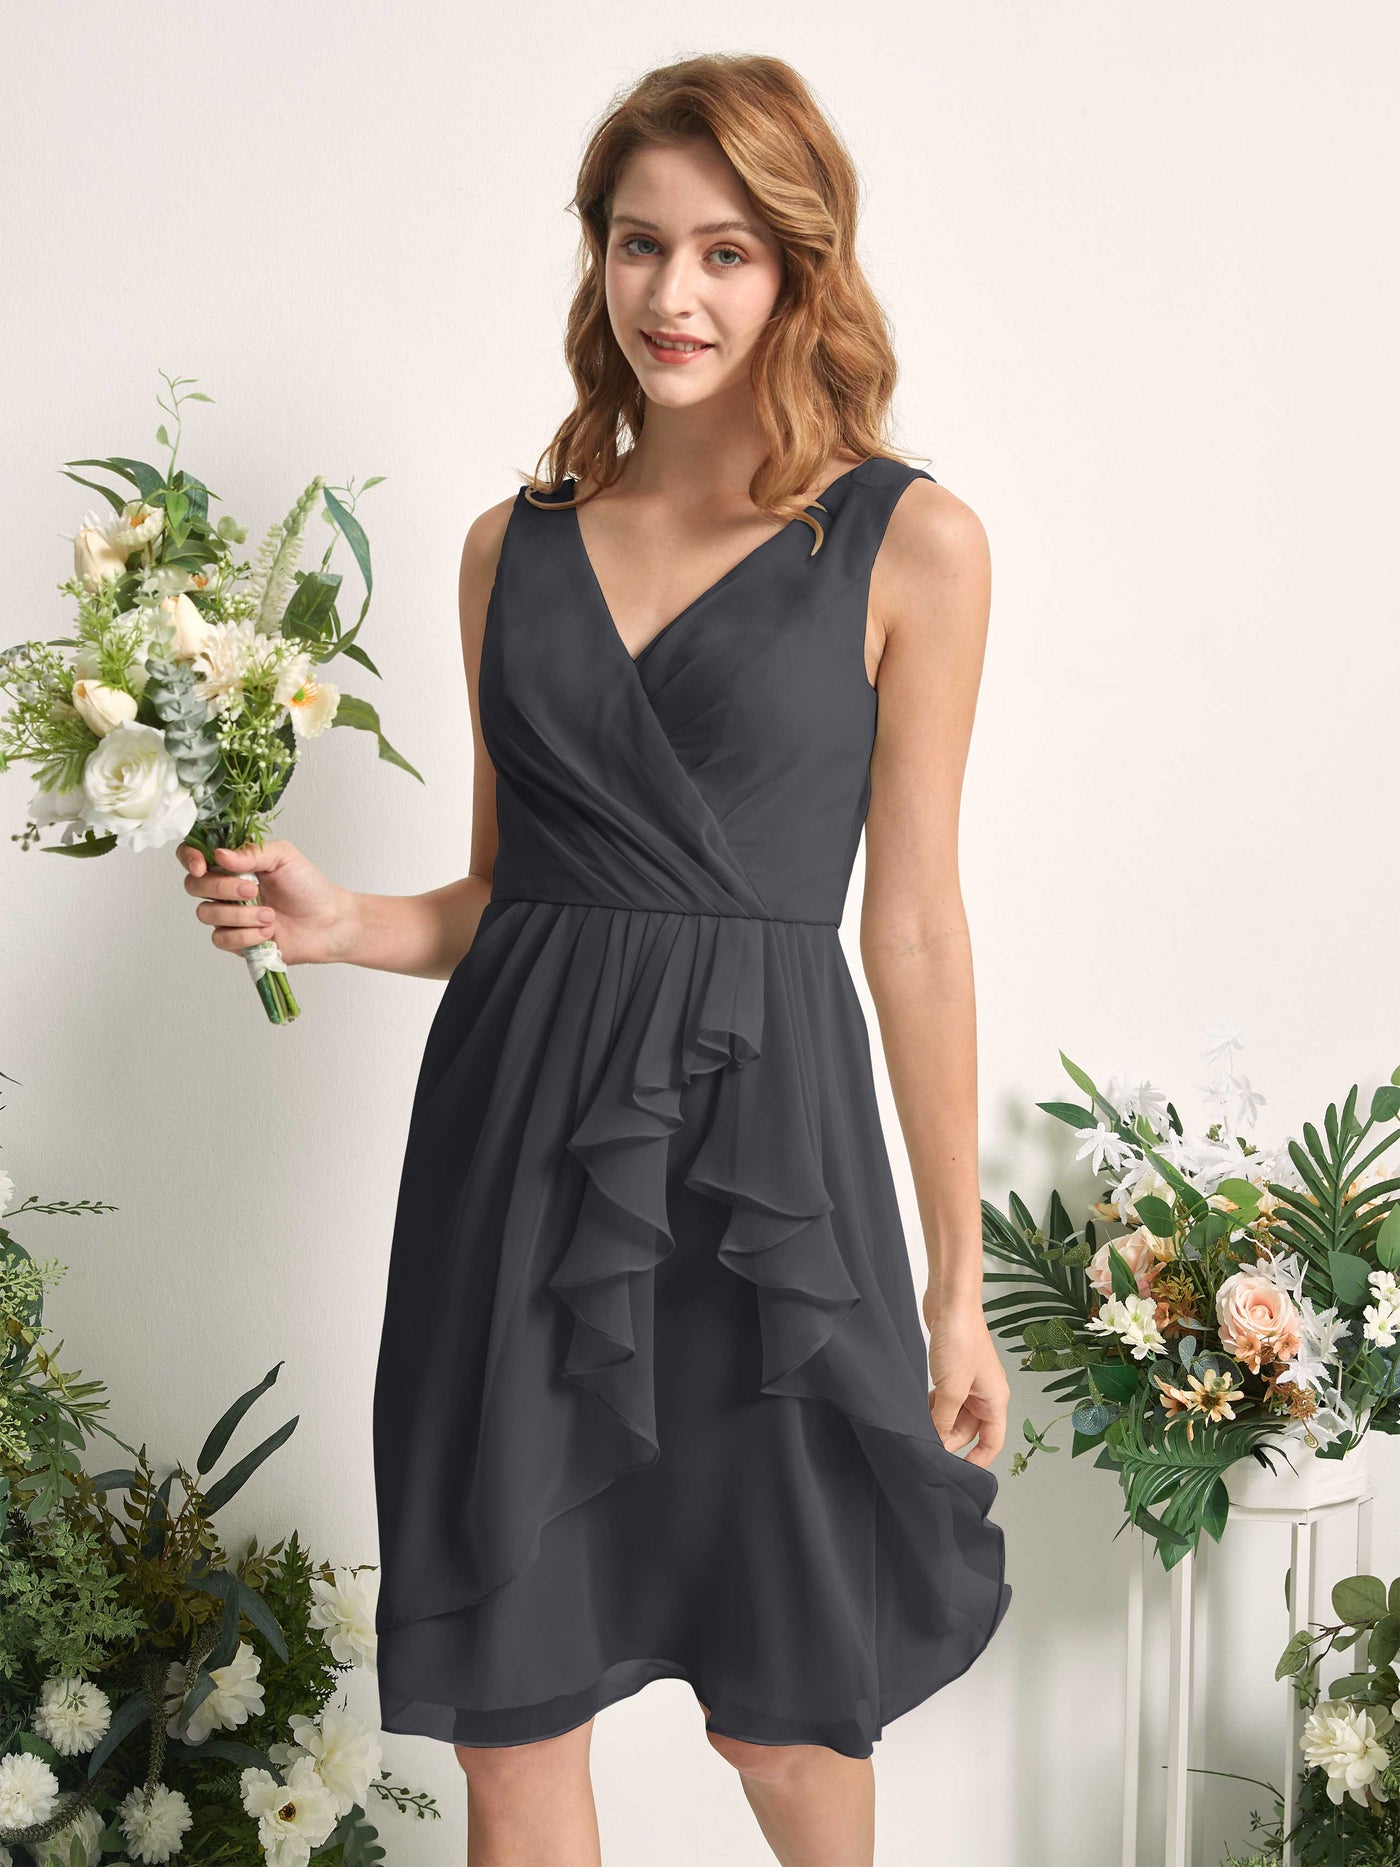 Bridesmaid Dress A-line Chiffon Straps Knee Length Sleeveless Wedding Party Dress - Pewter (81226638)#color_pewter